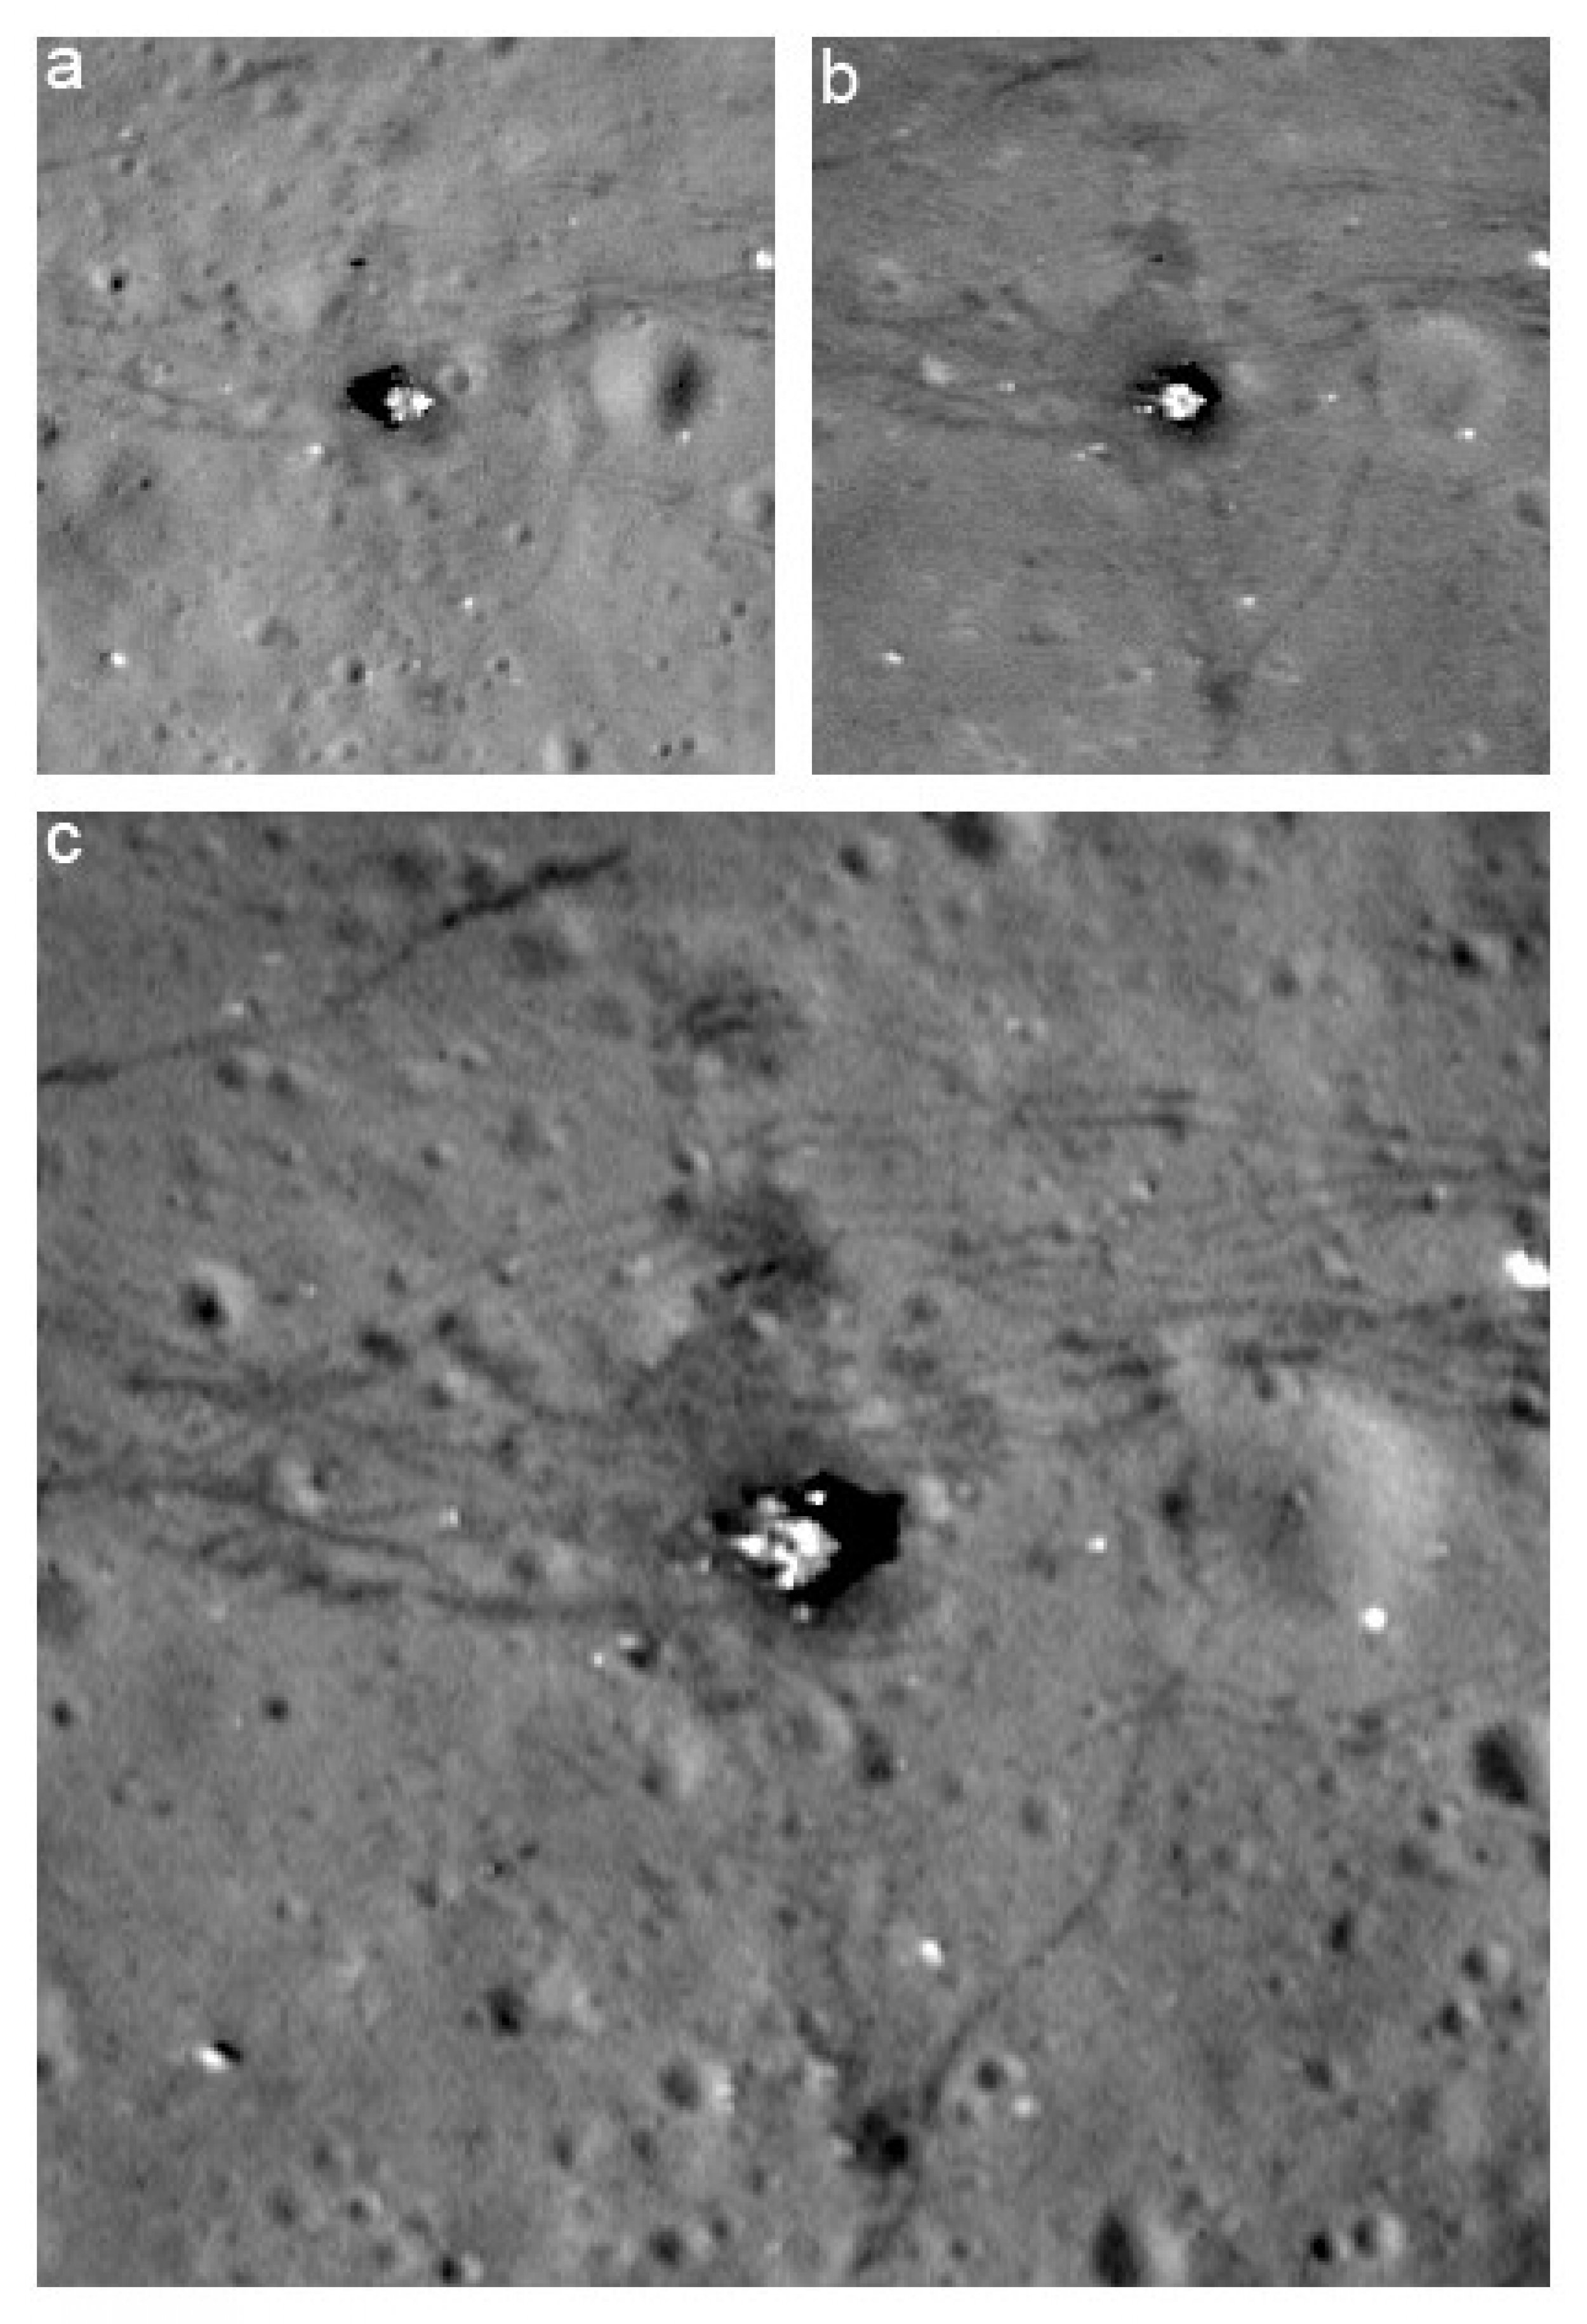 Resolution comparison between nominal orbit images of the Apollo 17 landing site a, b and the new low orbit image